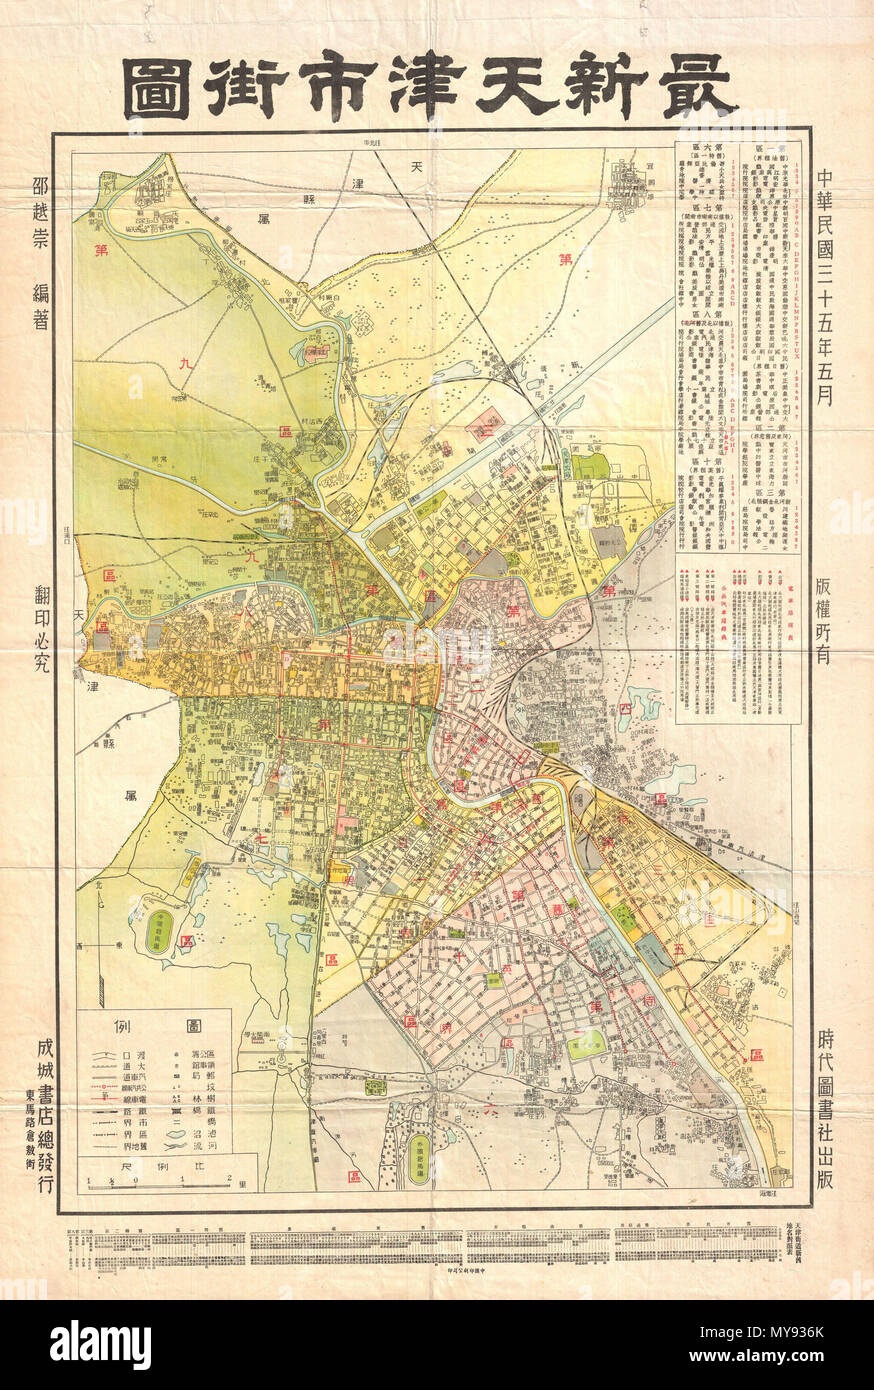 . Tientsin.  English: A highly uncommon map of Tianjin (Chinese: ??; pinyin: Tianjin; Wade-Giles: T'ien-chin; [t?i??n?? t??in??]; Postal map spelling: Tientsin), China dating to 1932. Tientsin was a major trading center in Northern China and, like Shanghai, had administrative concessions to several foreign nations including England, Italy, France, Austria-Hungary, Belgium, Japan, Germany and Russia. Curiously none of the foreign concessions are noted on this map, suggesting it was issued by an isolationist anti-trade element. It does however identify streets, rail lines, administrative buildin Stock Photo